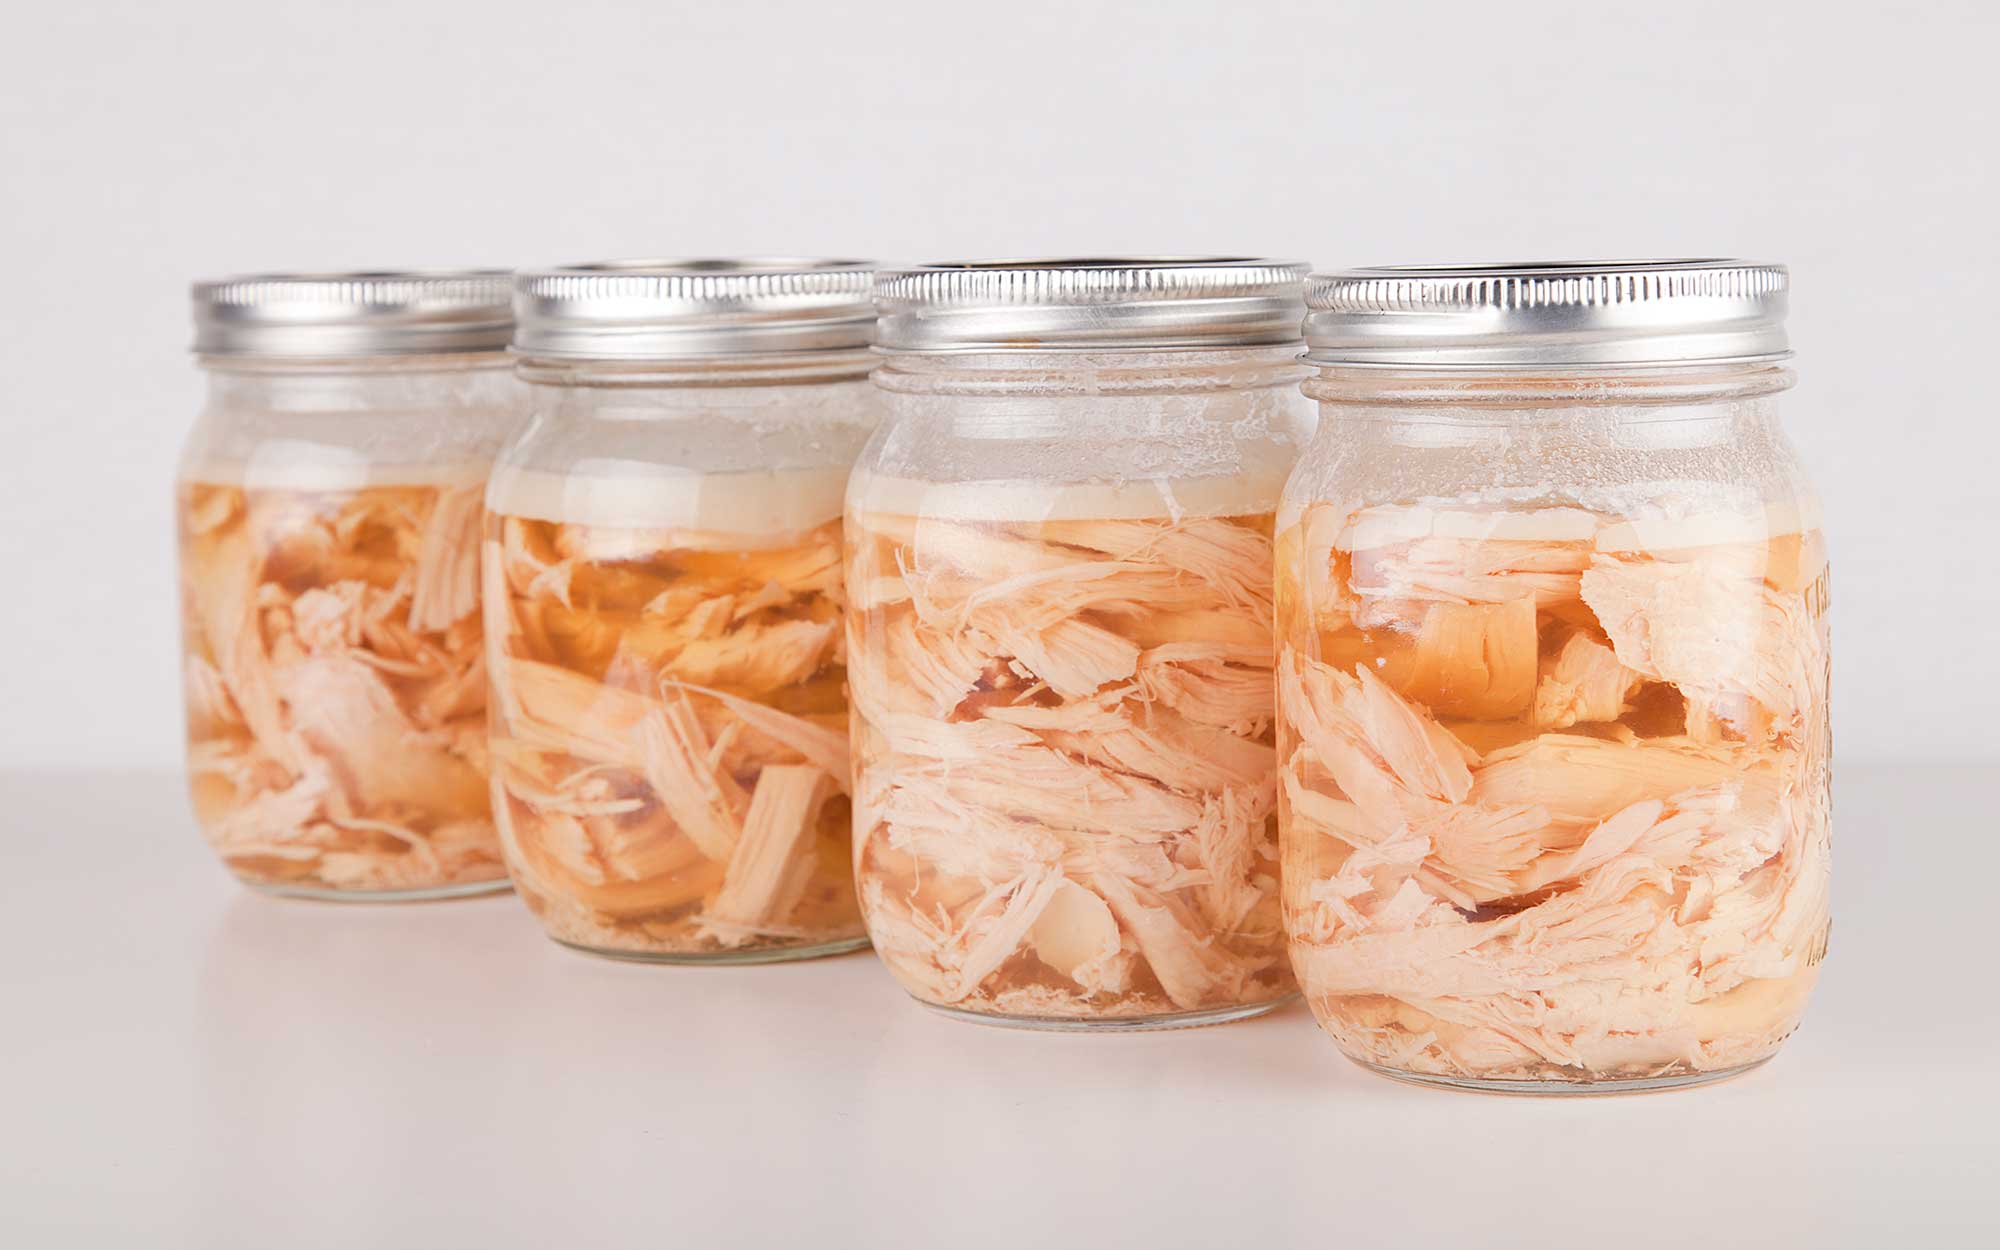 Four jars of home-canned chicken on a white countertop.